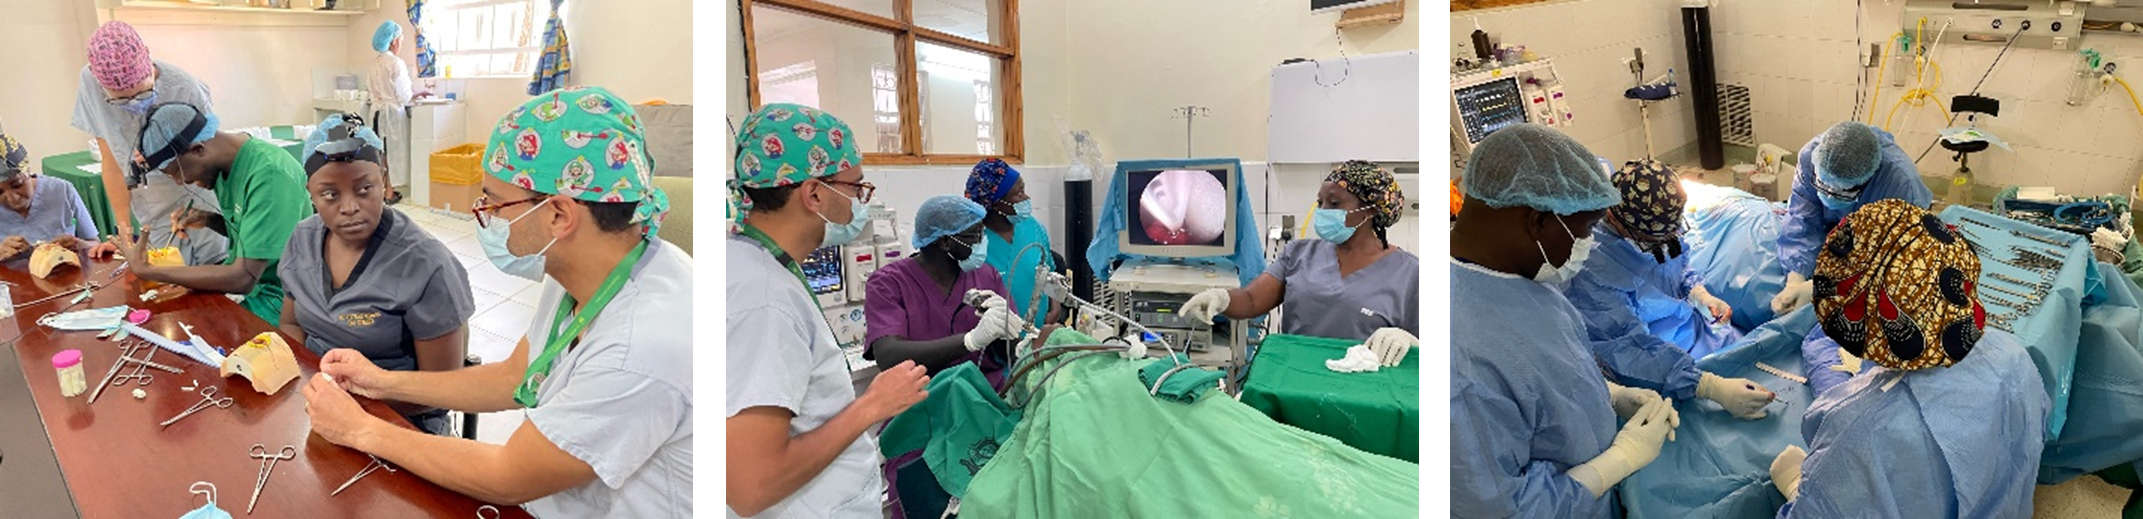 Training and Surgery with the MTRH surgeons